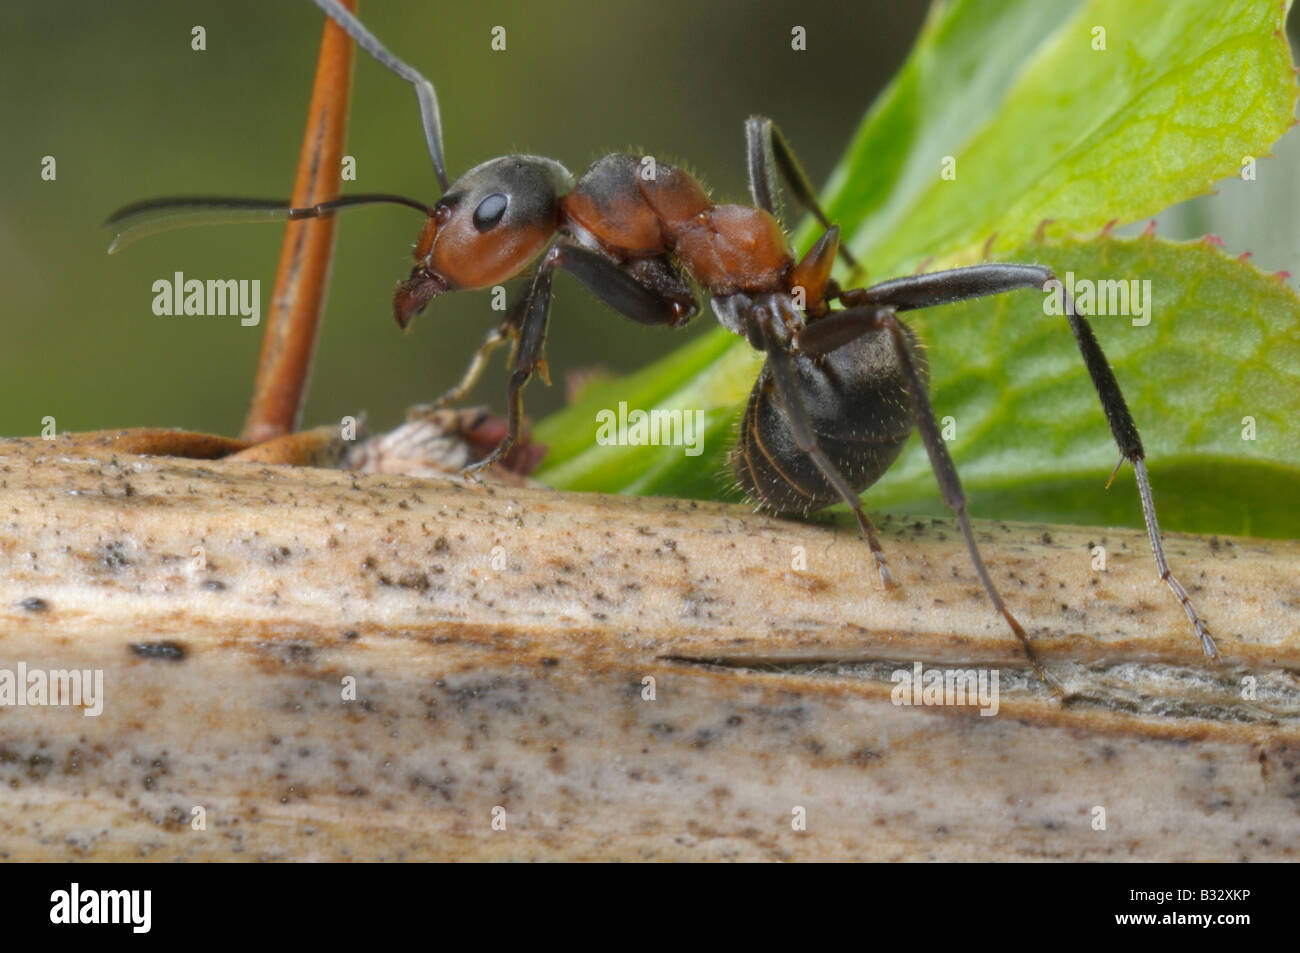 Red Ant (Formica rufa) clinging to a stem Stock Photo